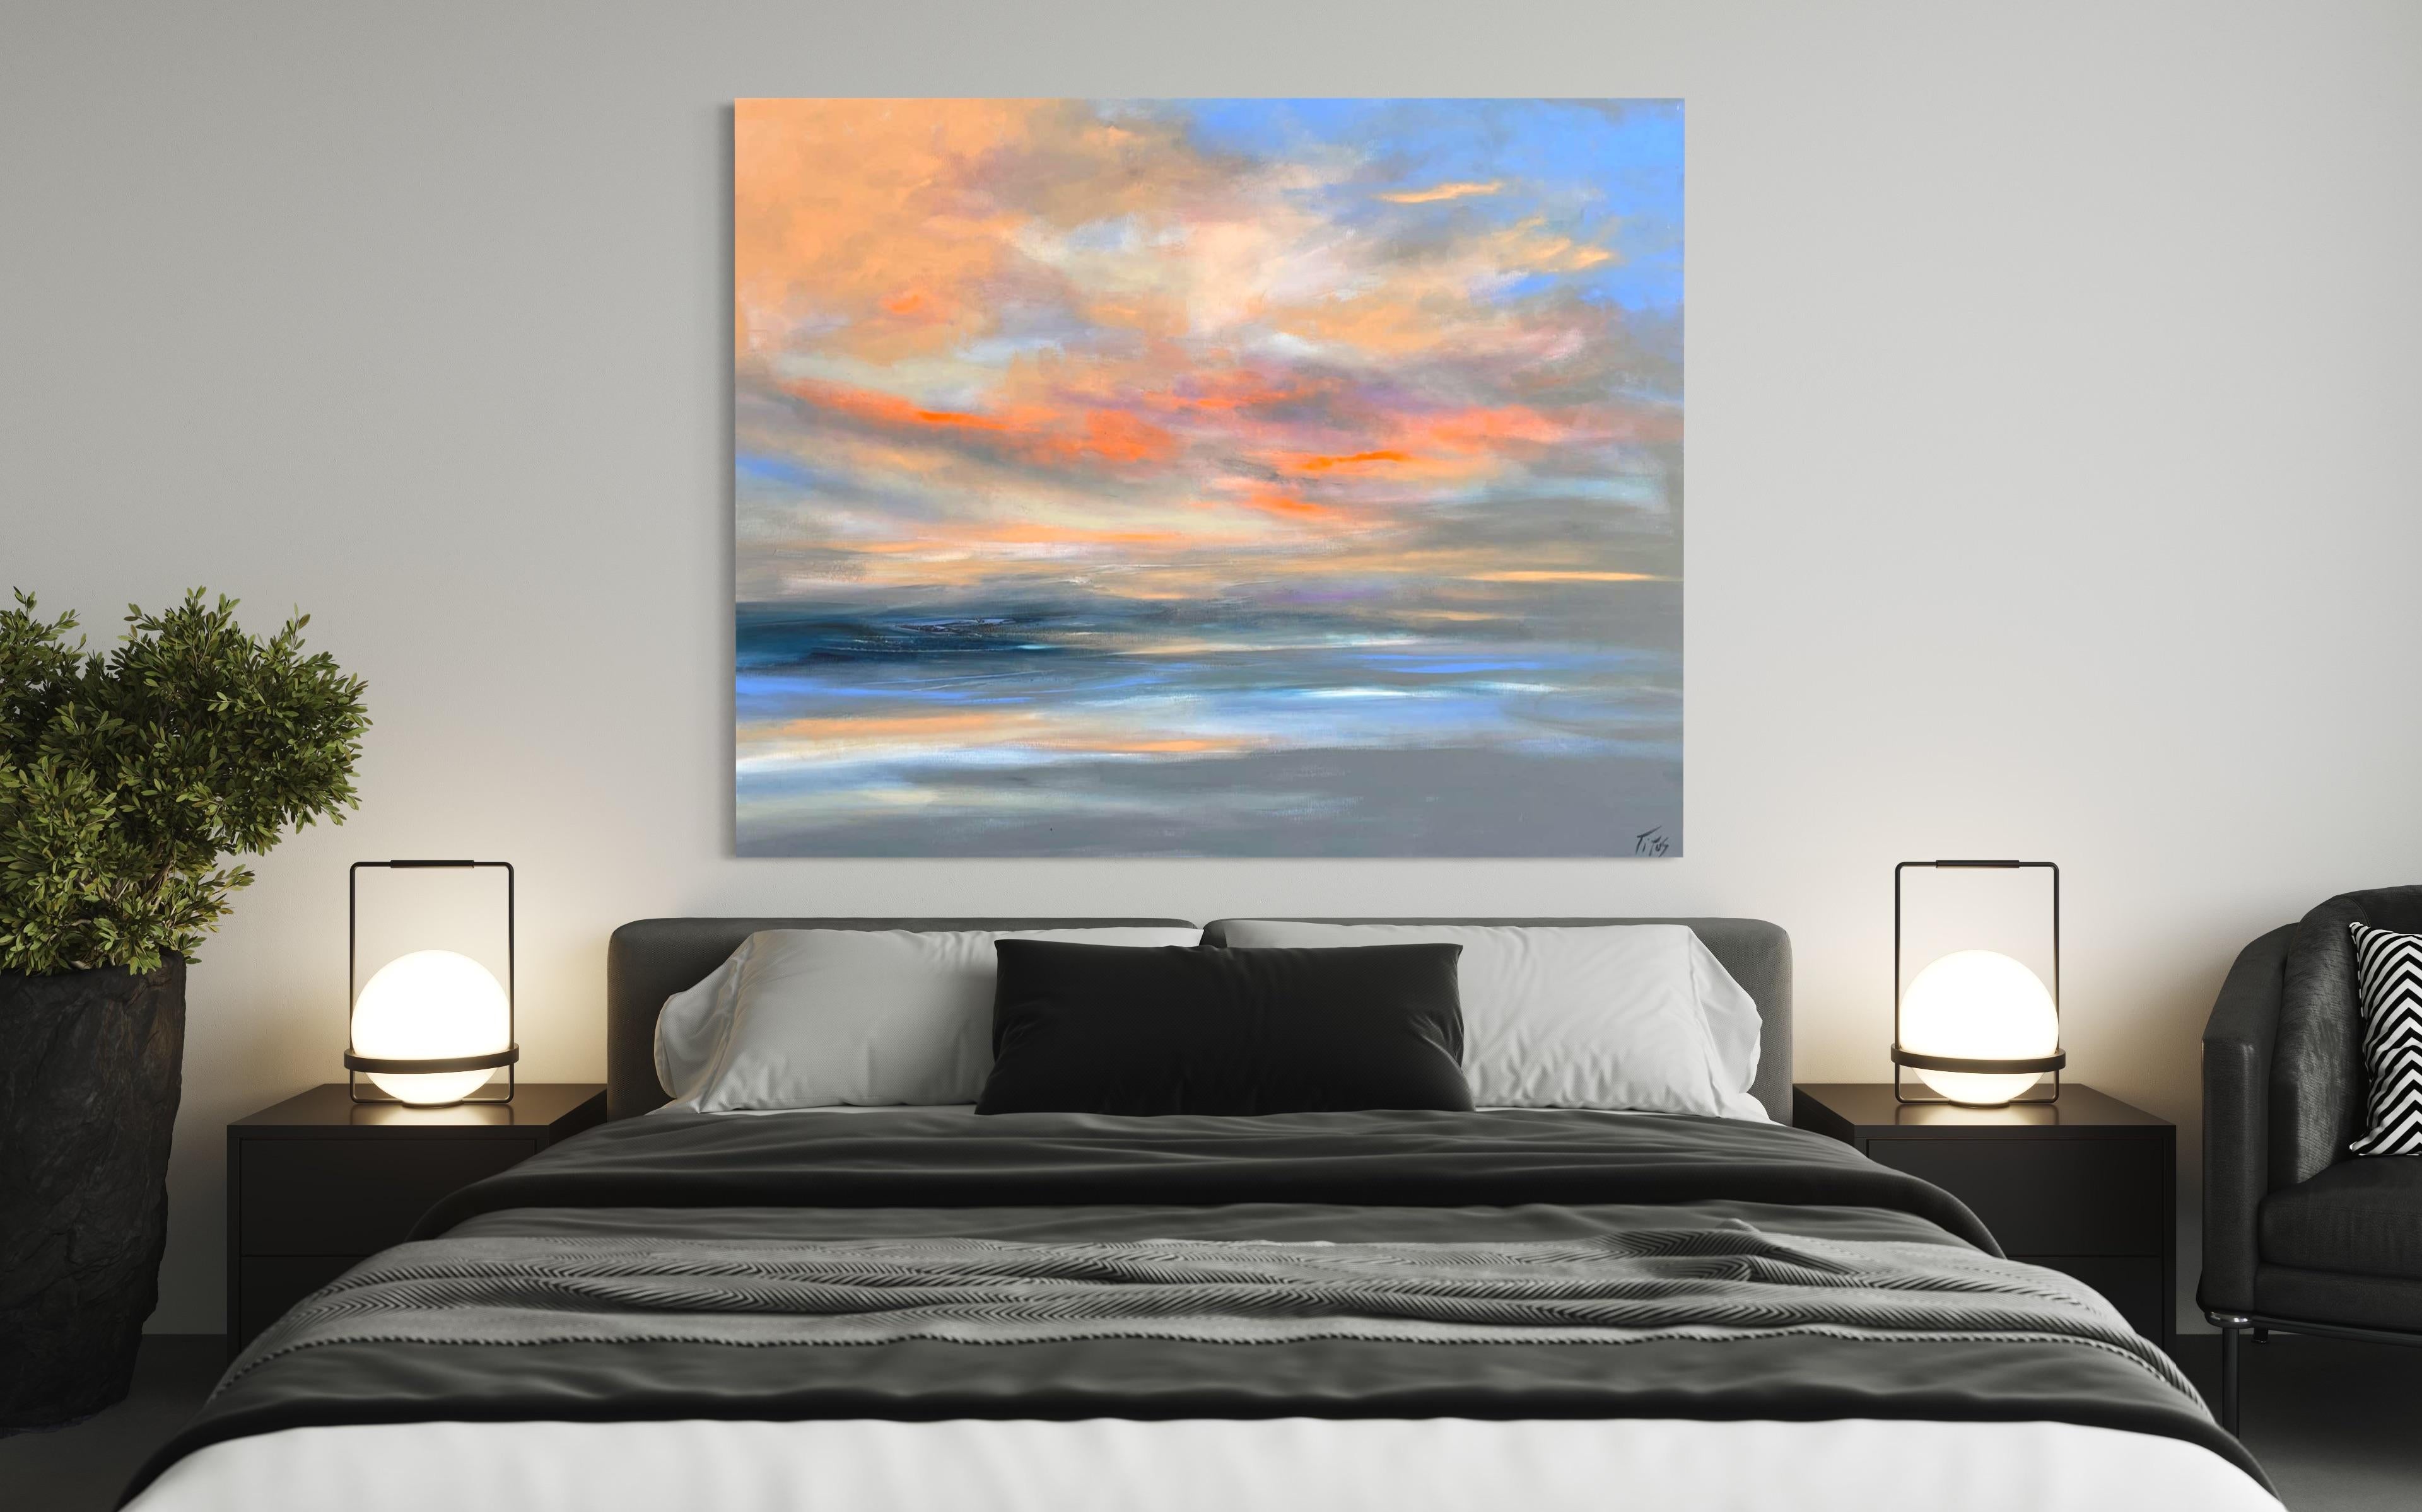 'Silence' - Sunset Over the Ocean - Large Abstract Expressionist Seascape - Painting by Mary Titus